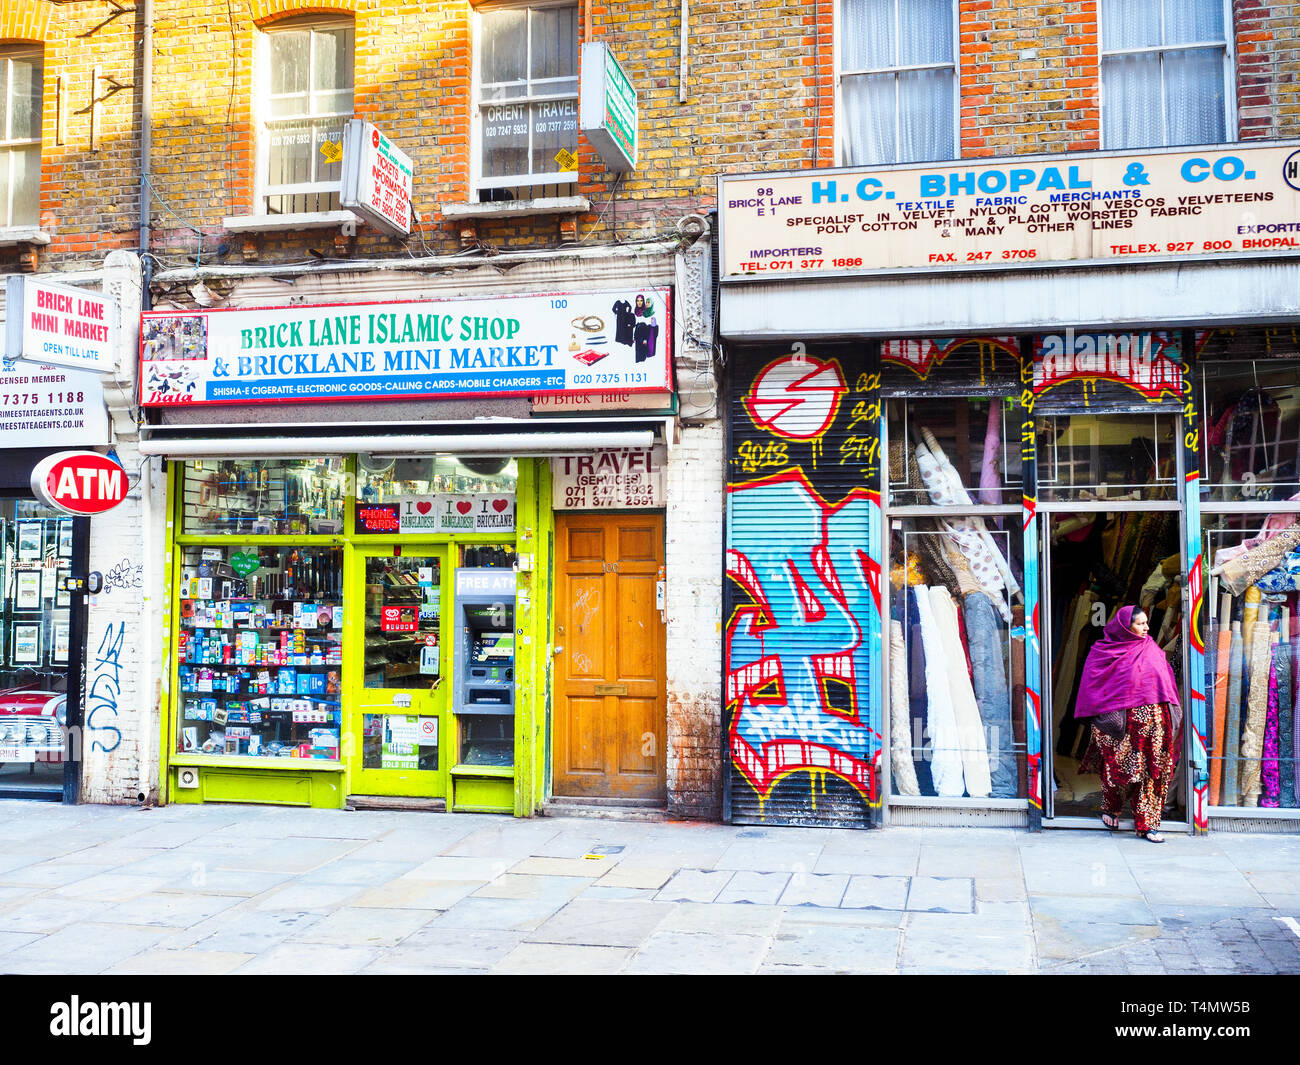 Shops front in Brick Lane - London, England Stock Photo